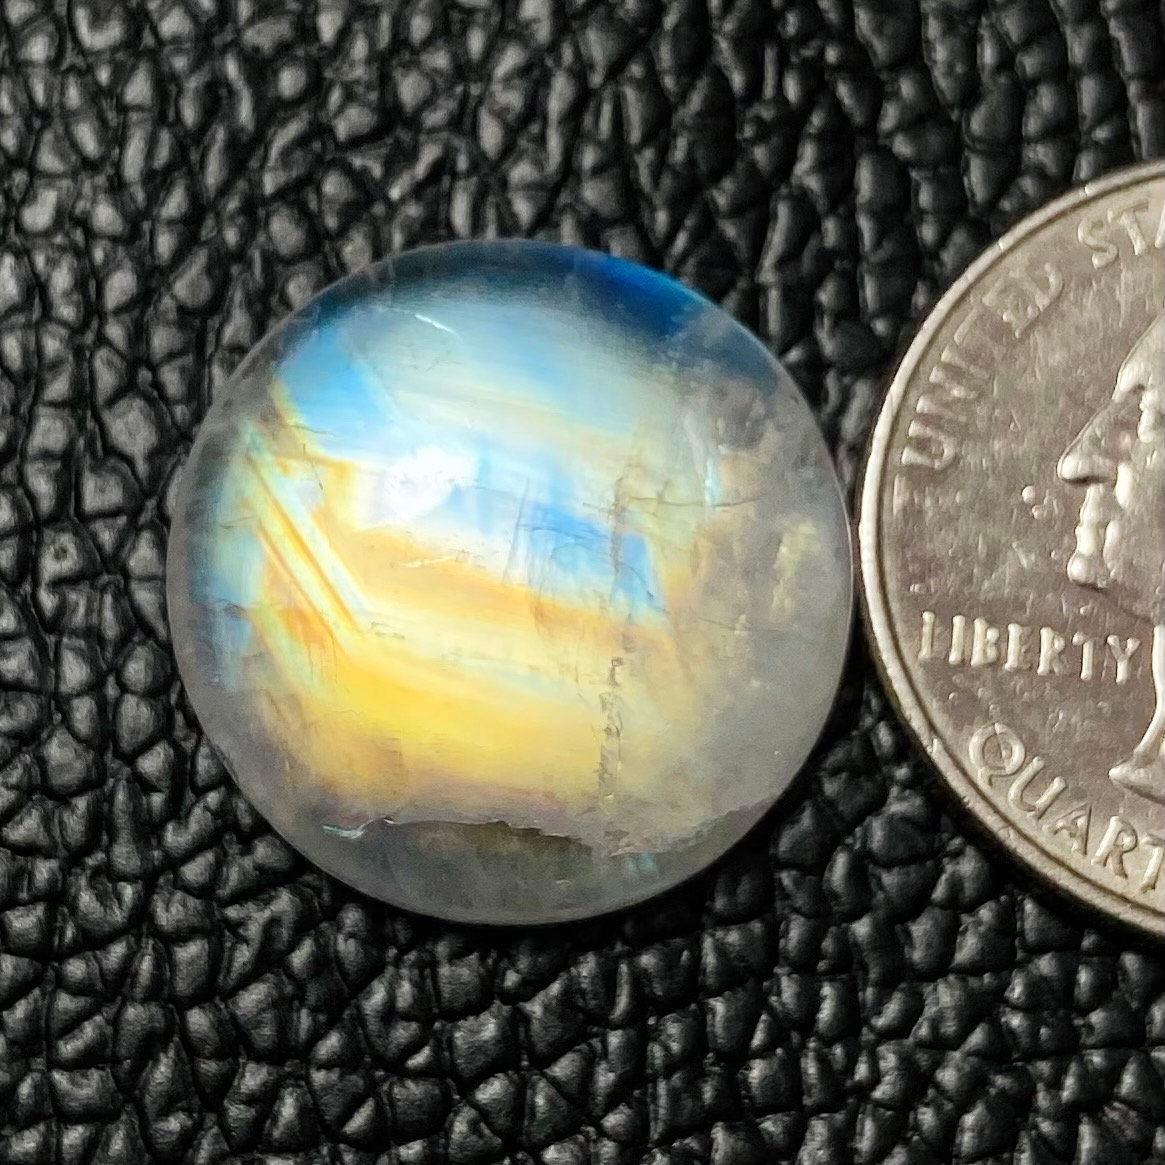 Natural Rainbow Moonstone Cabochon Top Quality Moonstone Loose Gemstone Stone For Jewelry Use 17x12x6MM 9.35 Cts #MU-867